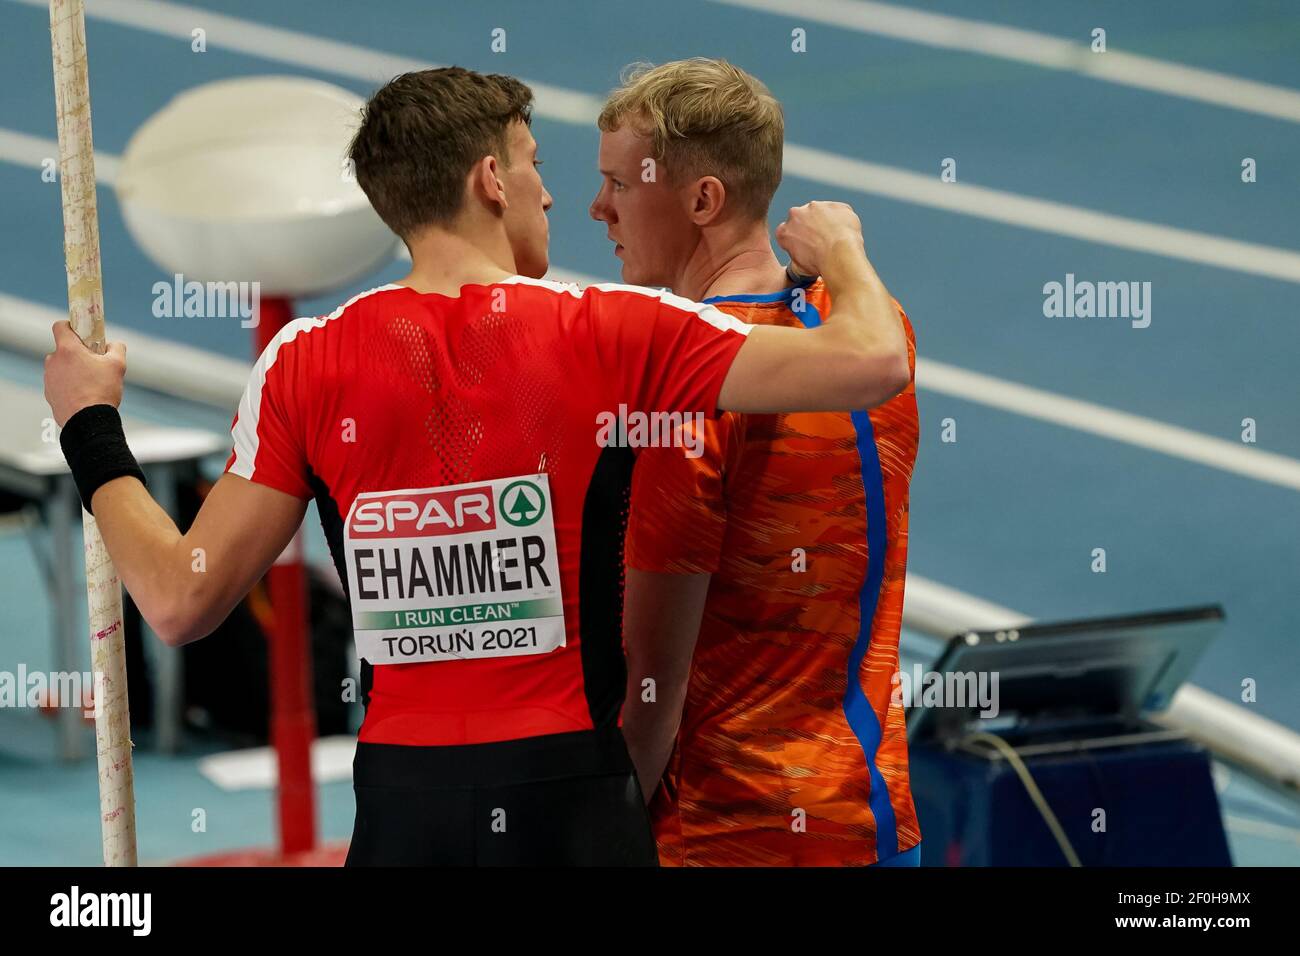 TORUN, POLAND - MARCH 7: Simon Ehammer of Switzerland and Rik Taam of The  Netherlands competing in the Mens Heptathlon Pole Vault during the European  Stock Photo - Alamy